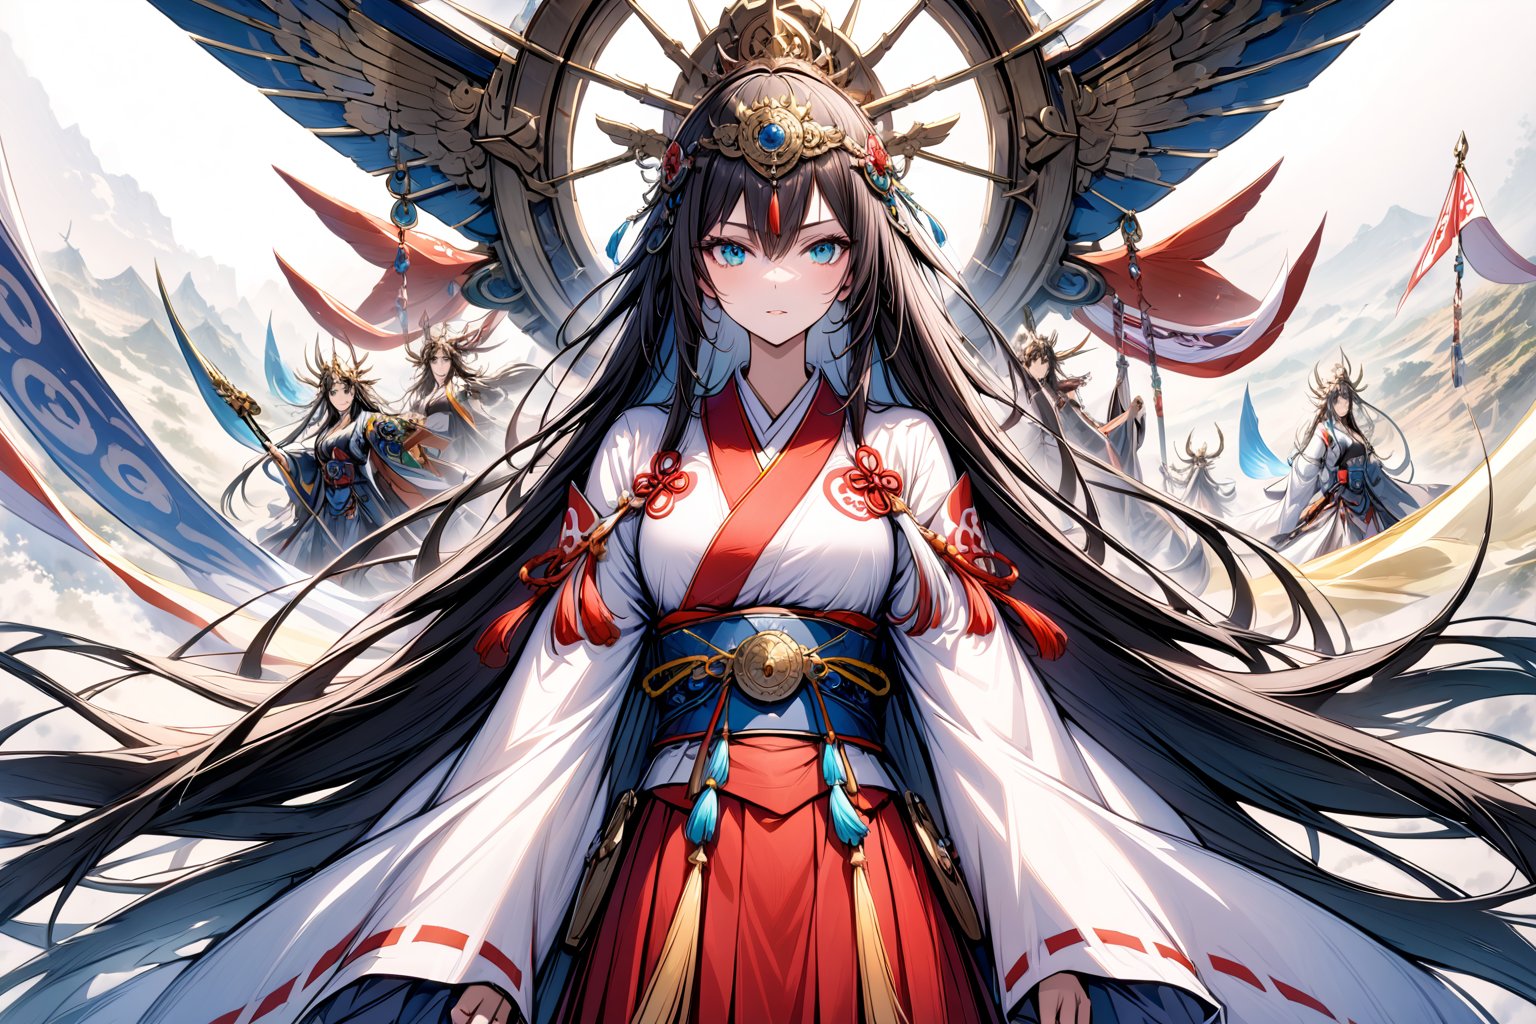 cenital plane, skin flag of Japan perfect and detail, person with the flag of Perú in the background, epic,
,SakayanagiArisu,Expressiveh,japanese_goddess